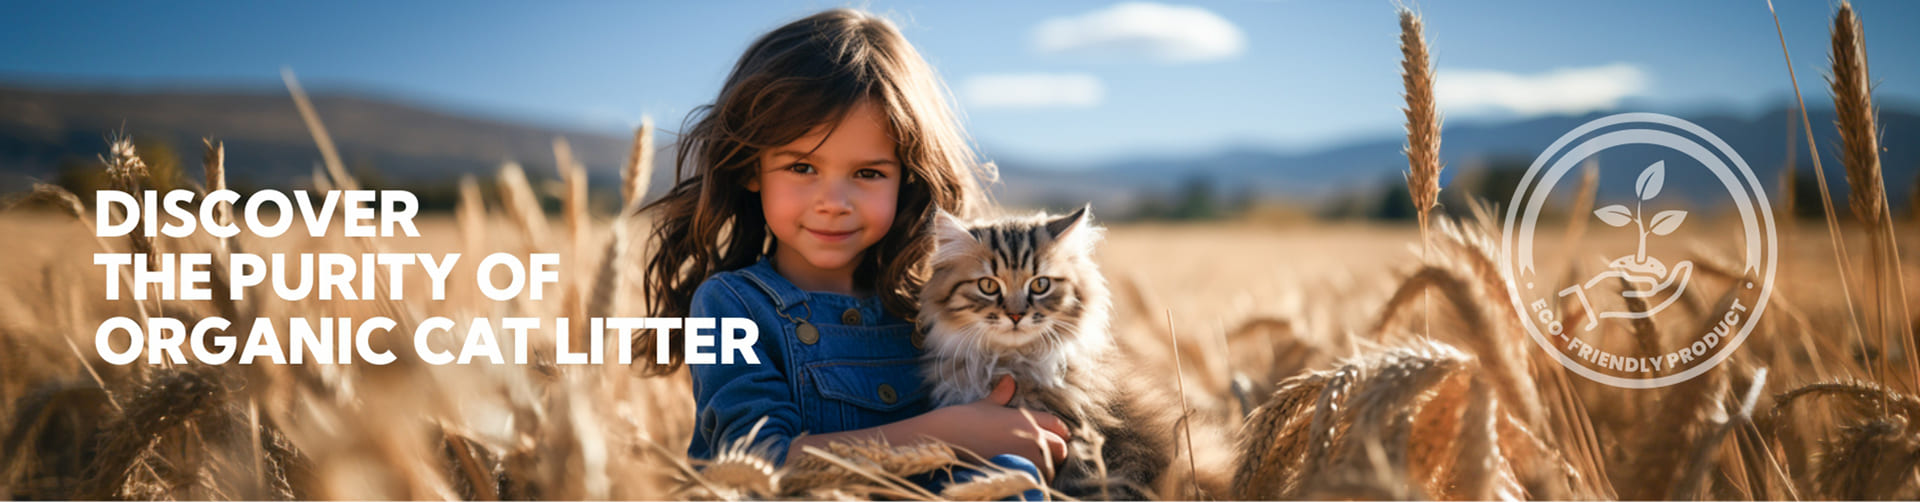 1 1920x501 Discover the purity of totally organic cat litters